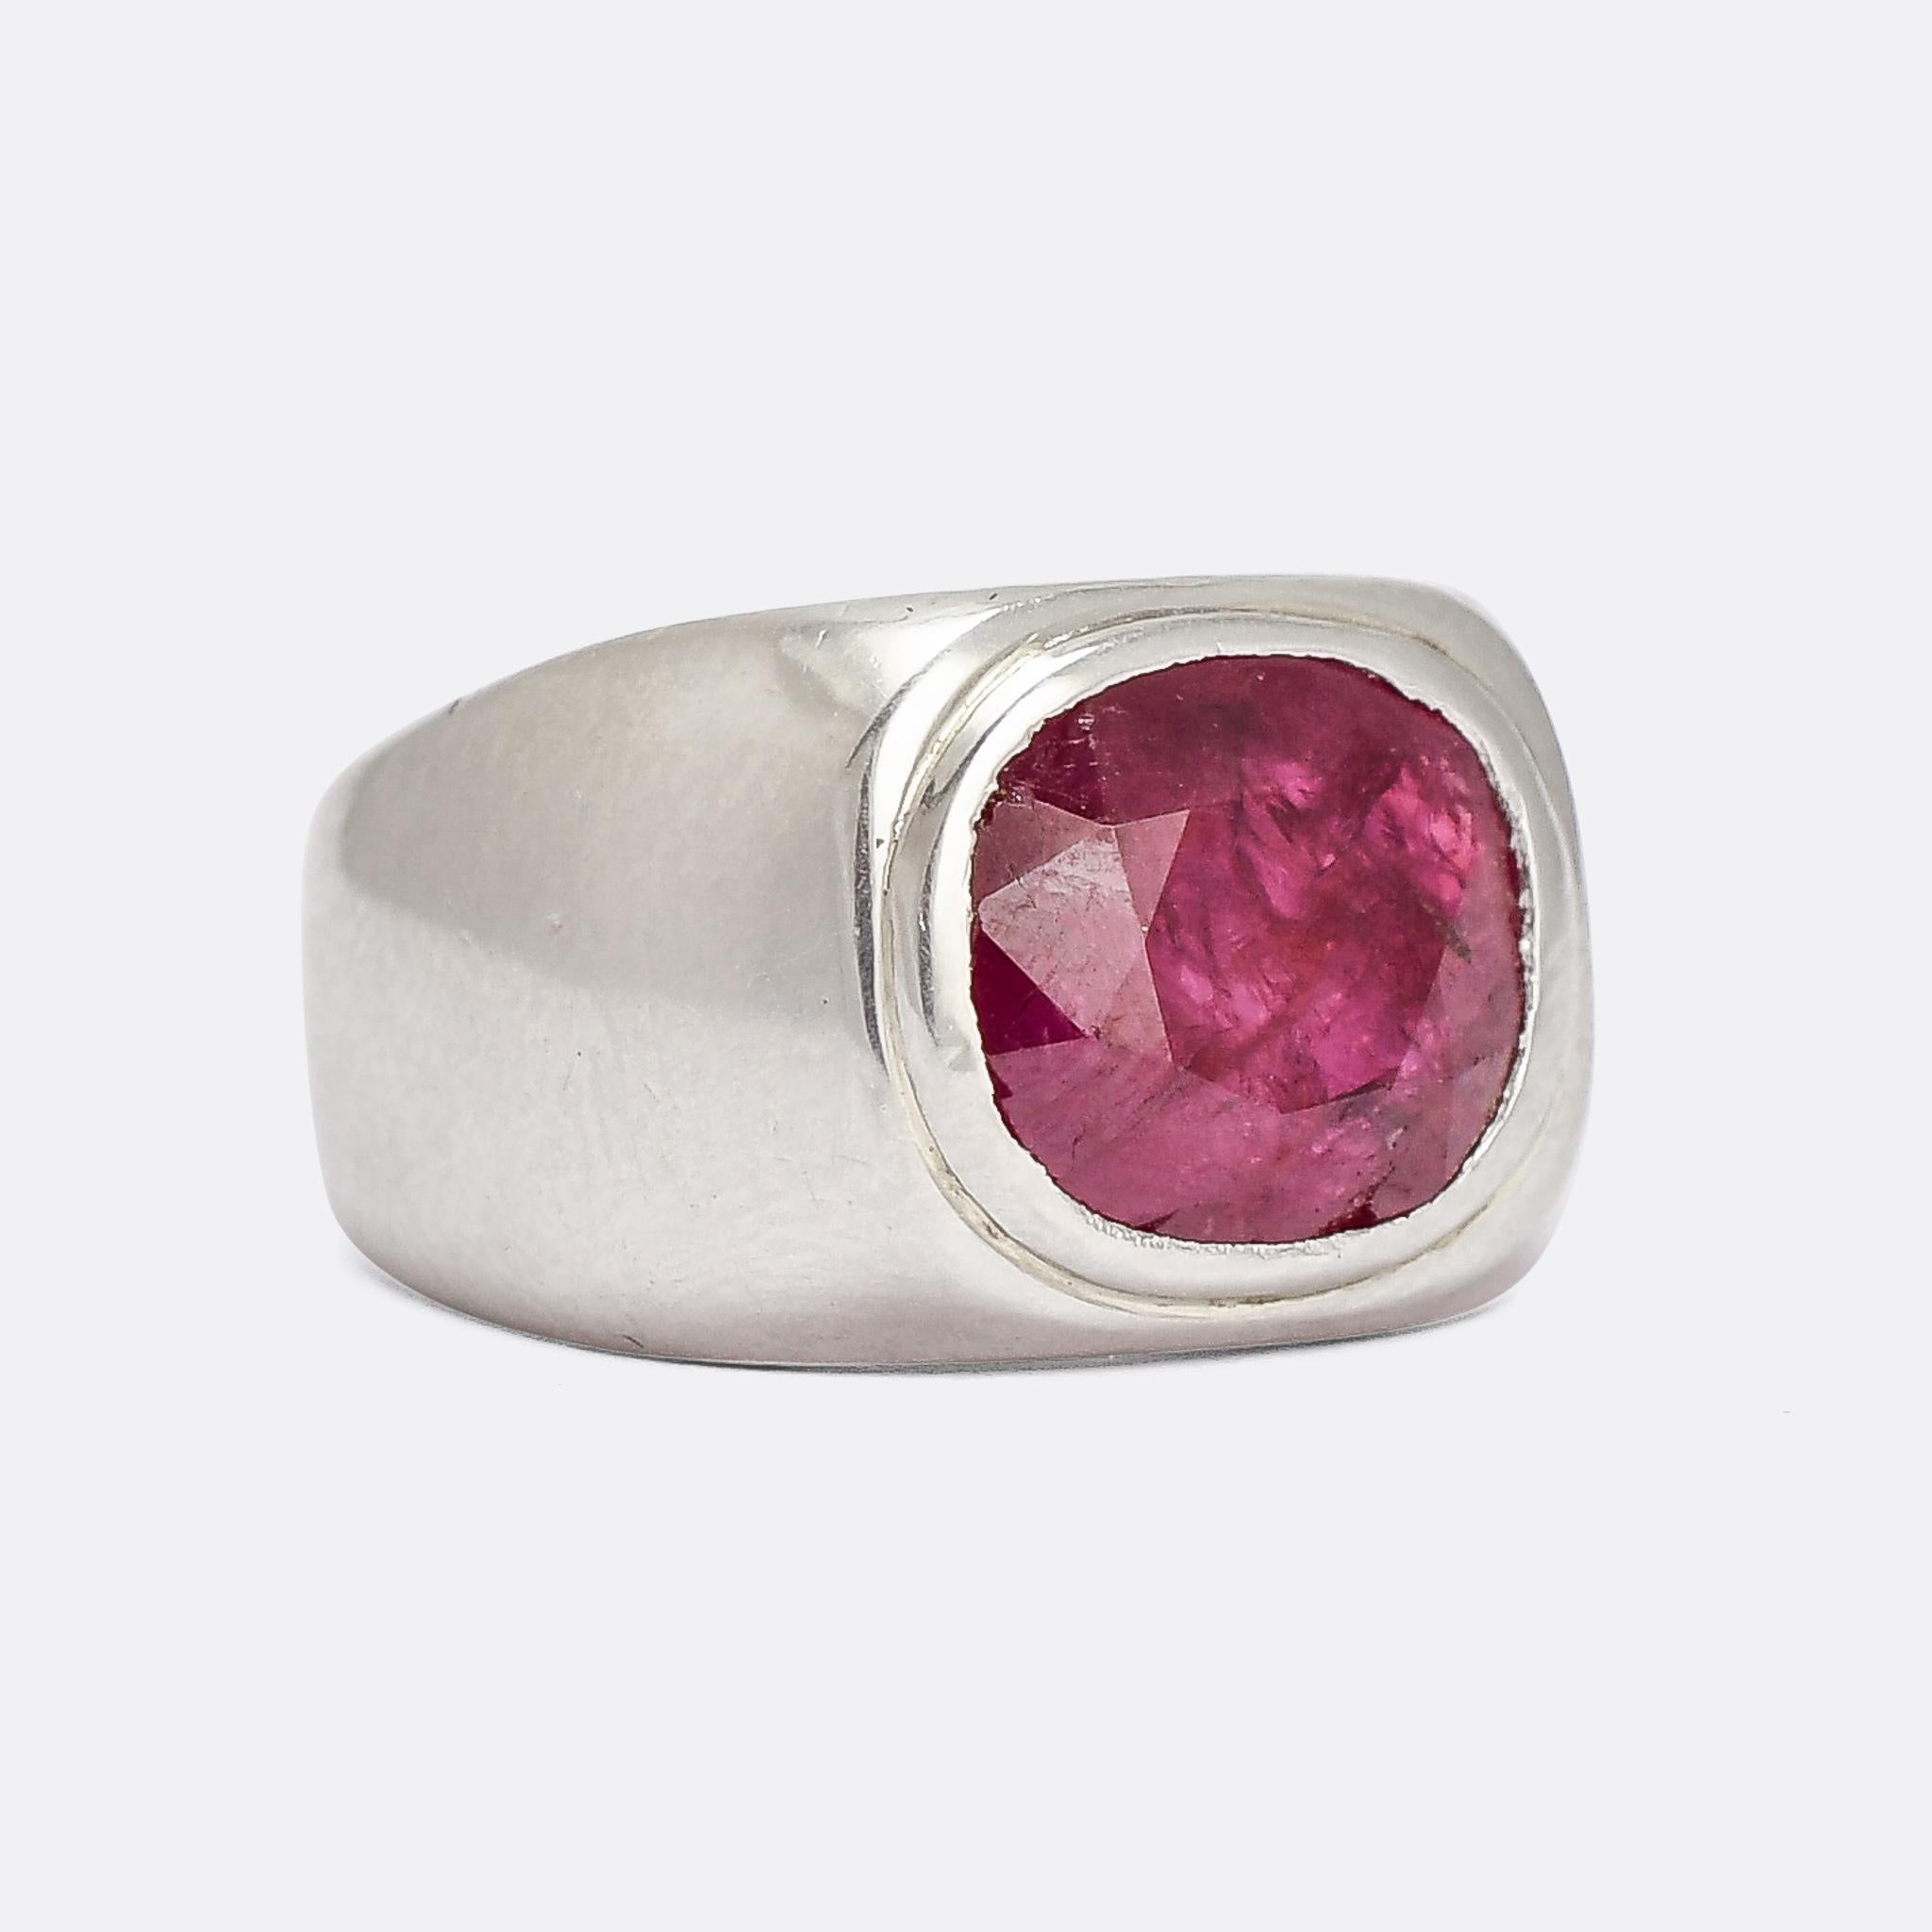 An incredibly Mid Century Modern signet ring set with a cushion cut no-heat Burma ruby, certified at 5.59 carats. The quality of the mount, likely created as a gents ring originally, reflects the quality of the stone: it's platinum throughout and